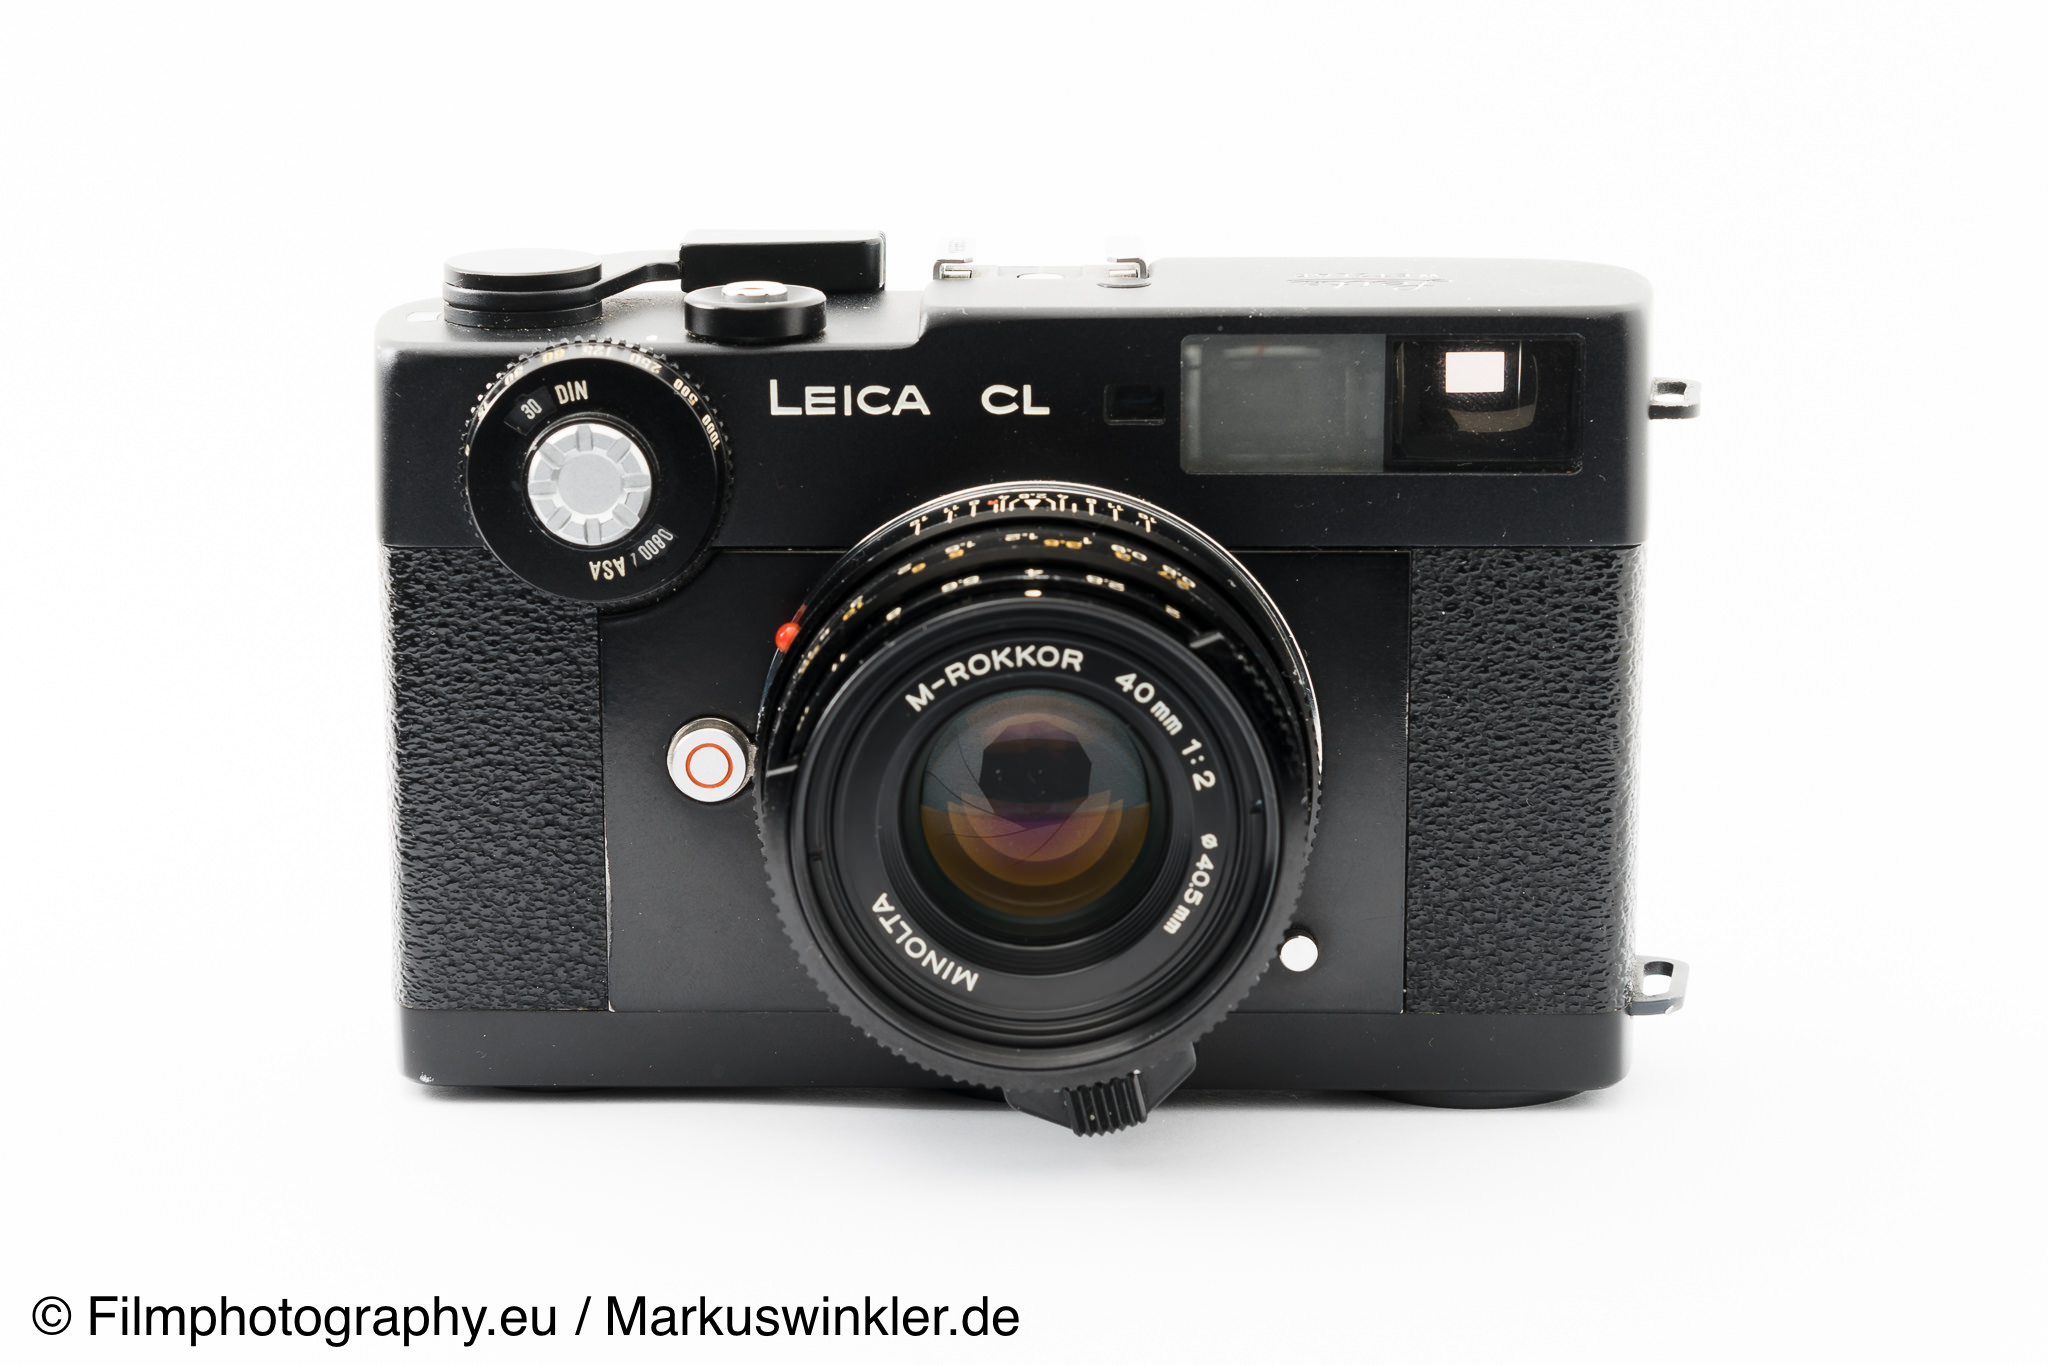 Leica CL - A special model of the Leica M camera series